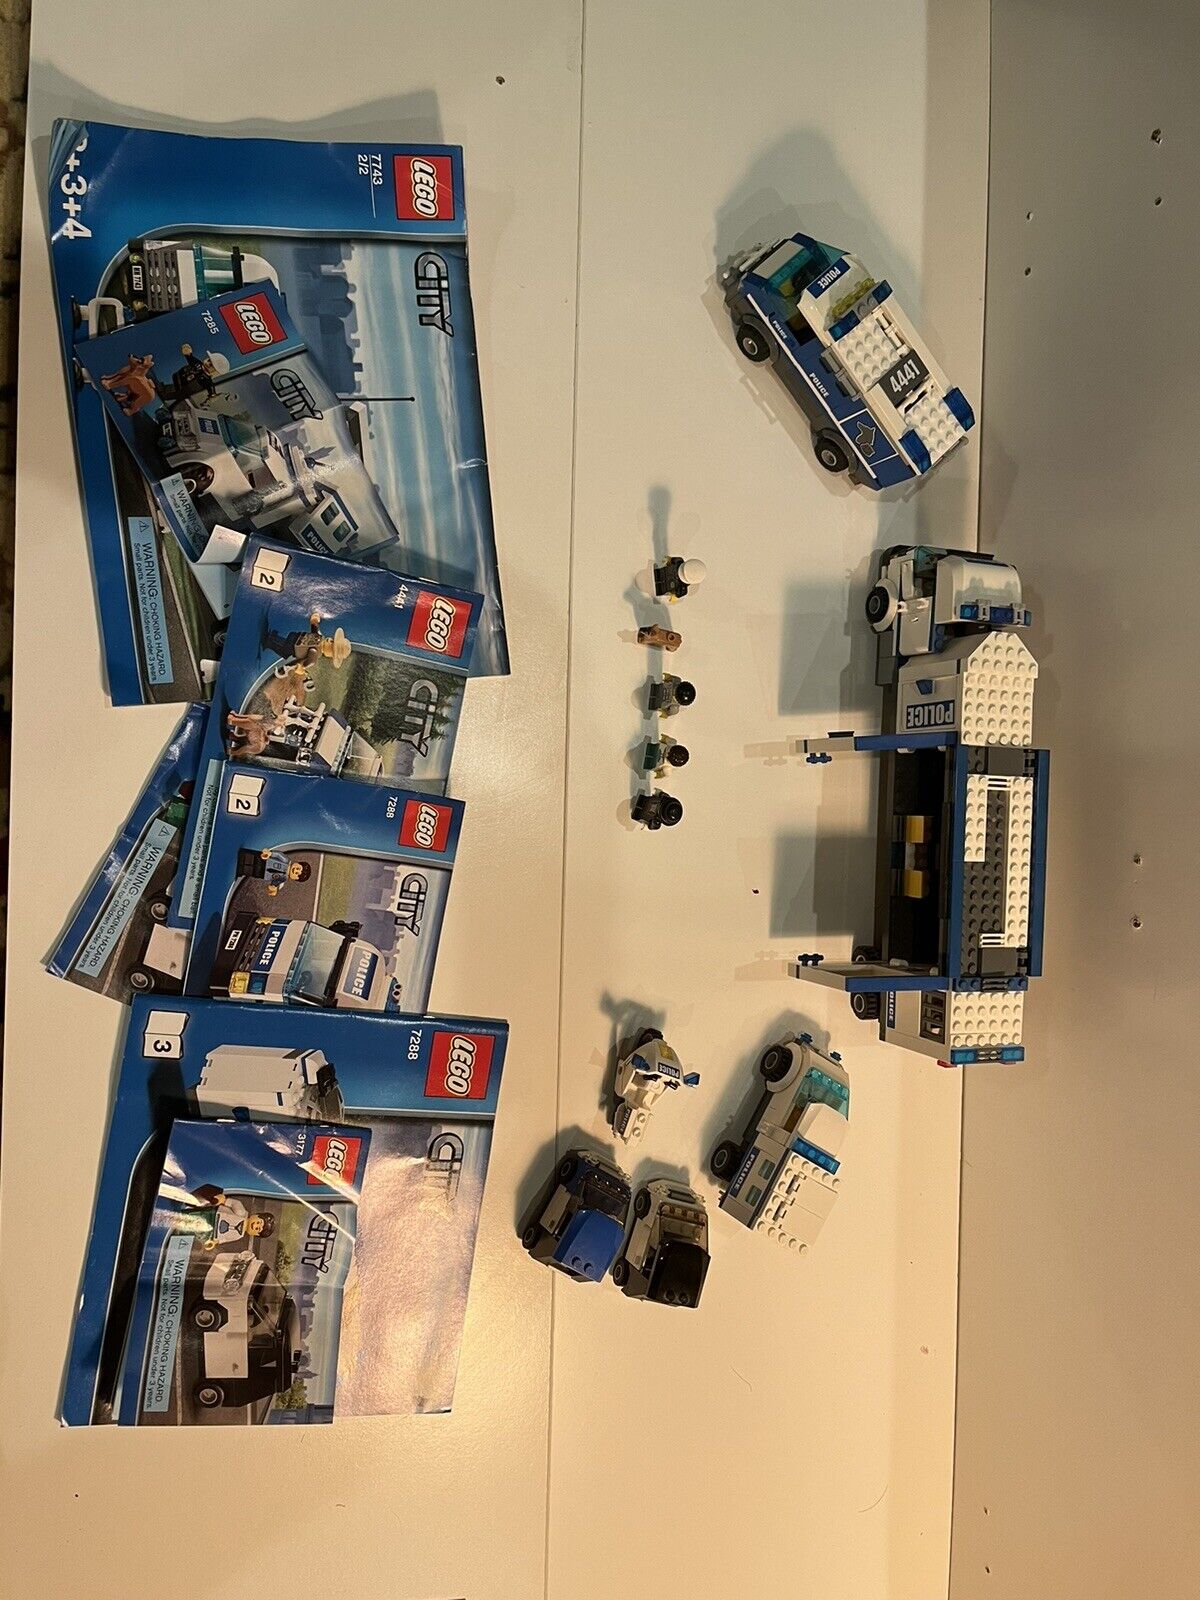 Lego City 7743, 7285, 4441, 7288, 3177 sets, with instructions. As is!